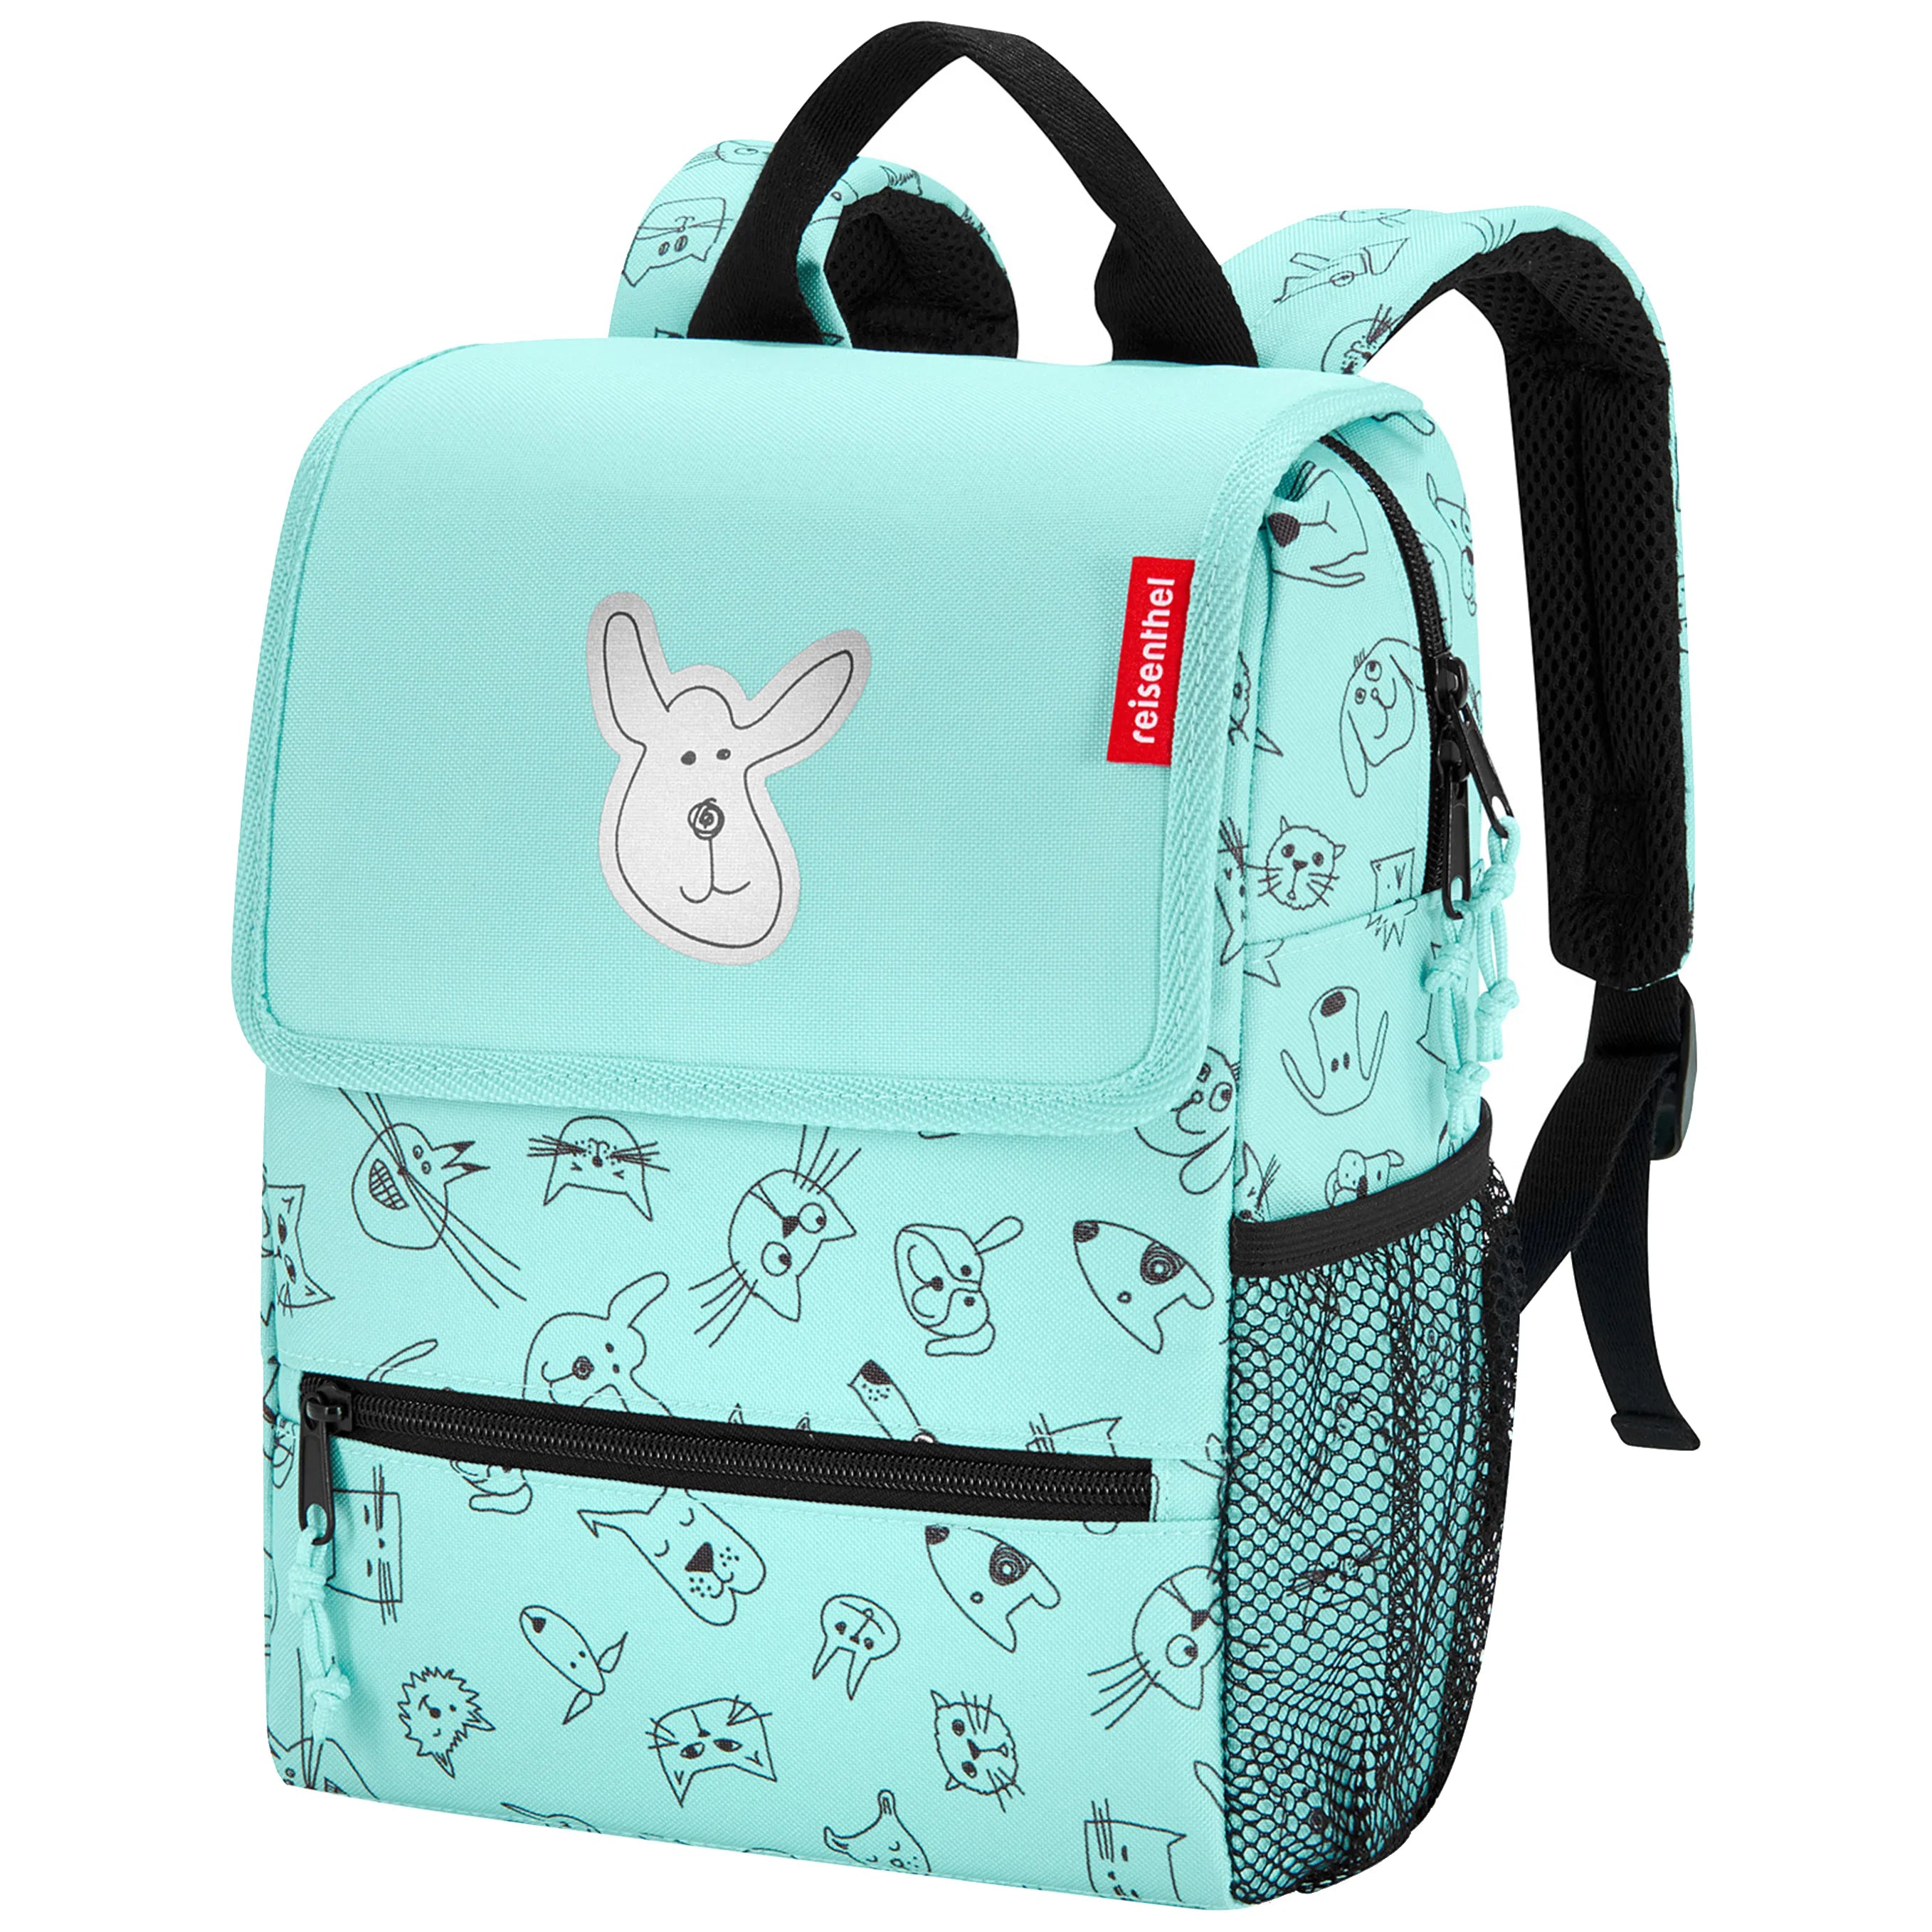 Reisenthel Kids Backpack Backpack 28 cm - cats and dogs mint